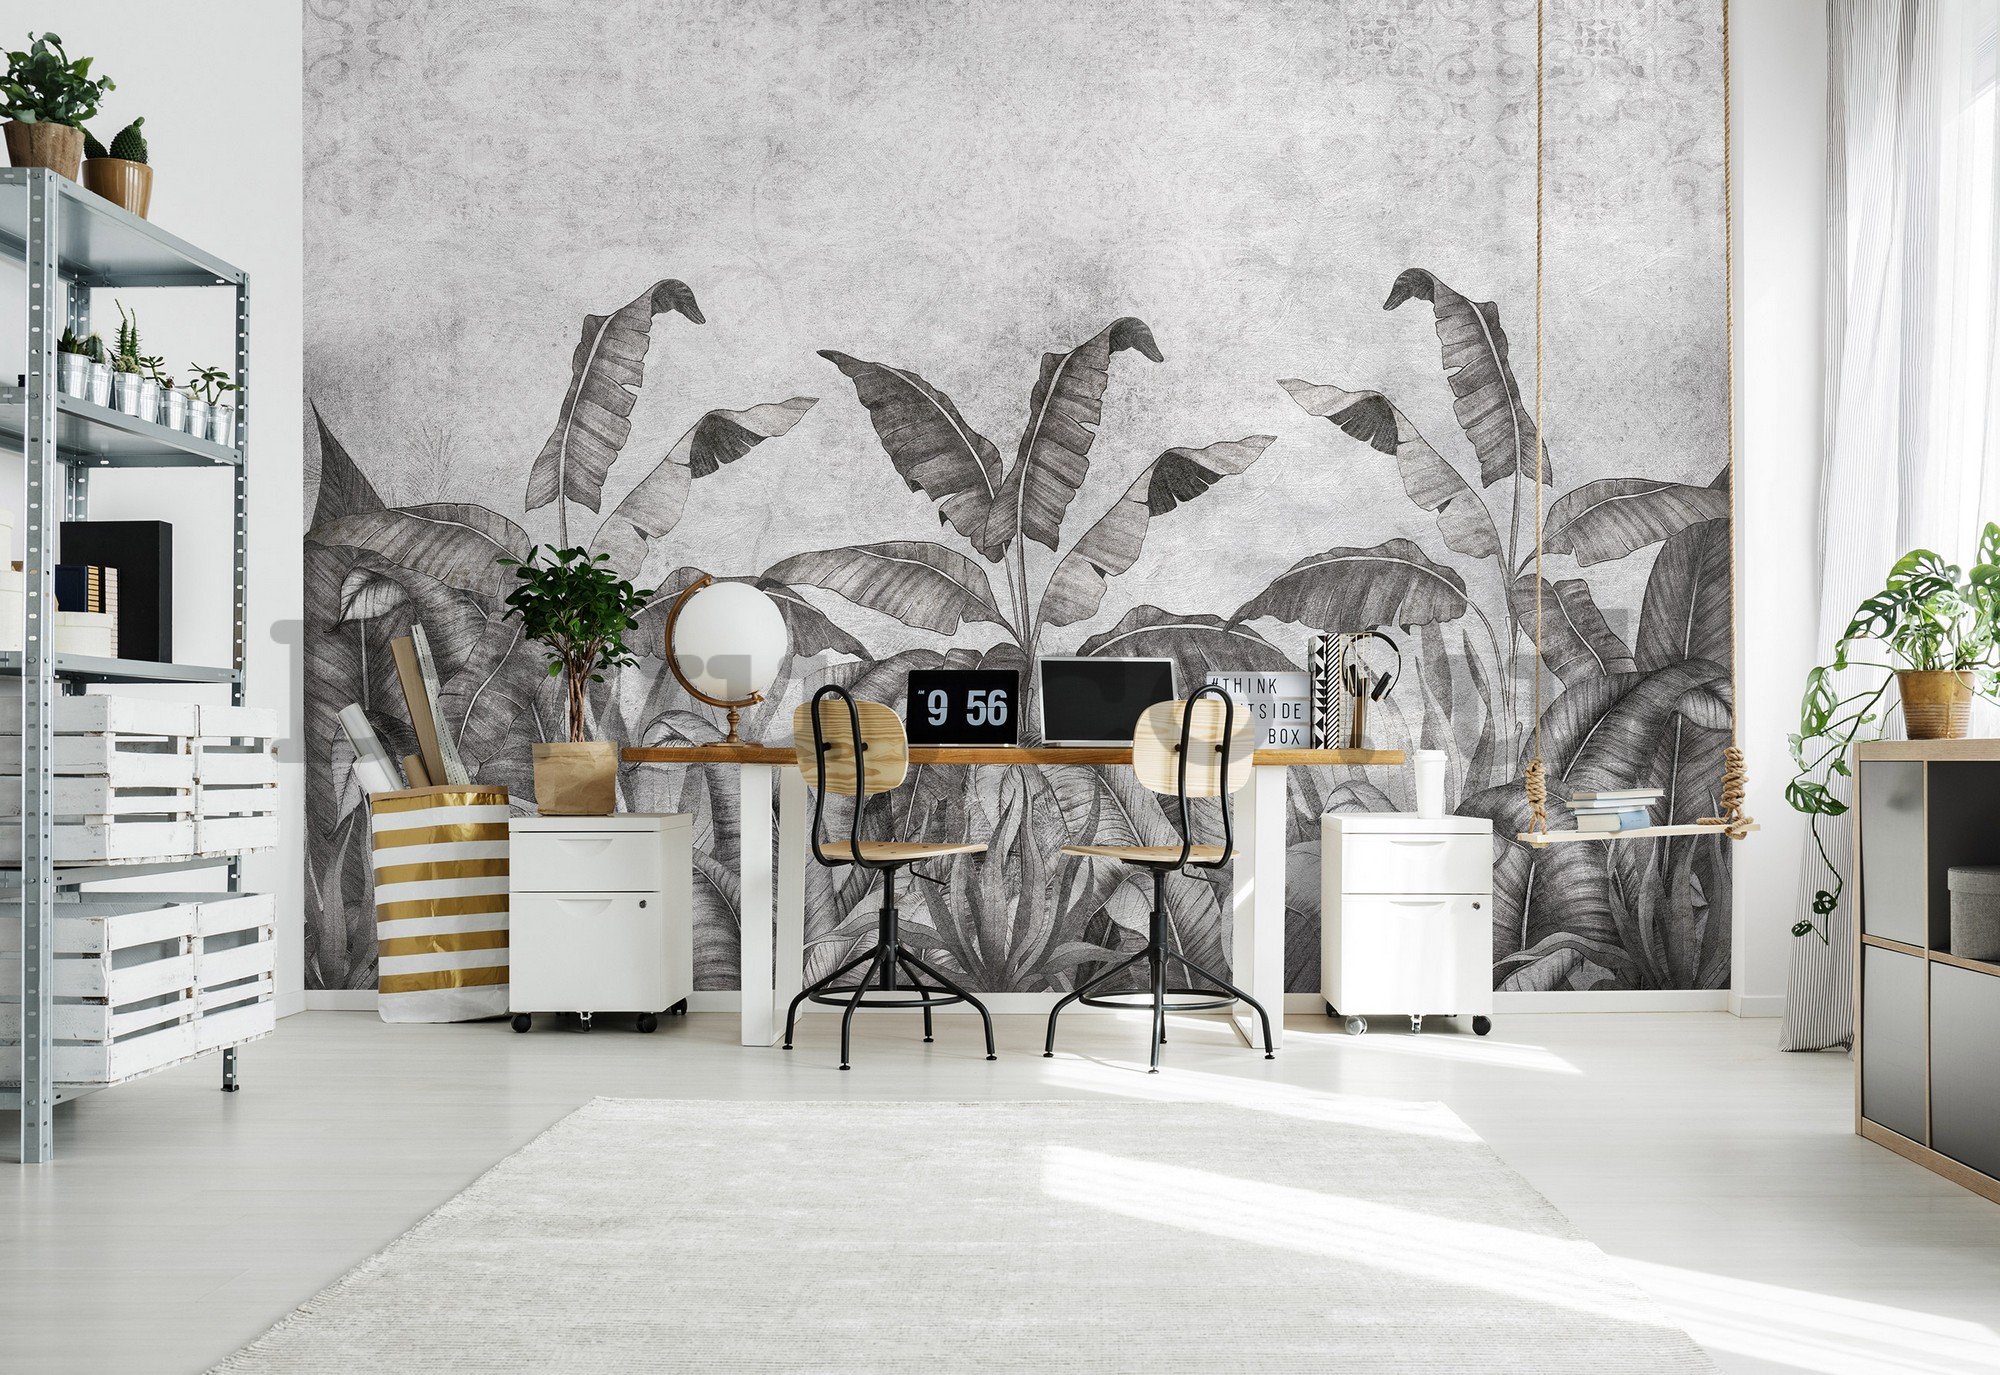 Wall mural vlies: Black and white imitation of natural leave (2) - 416x254 cm